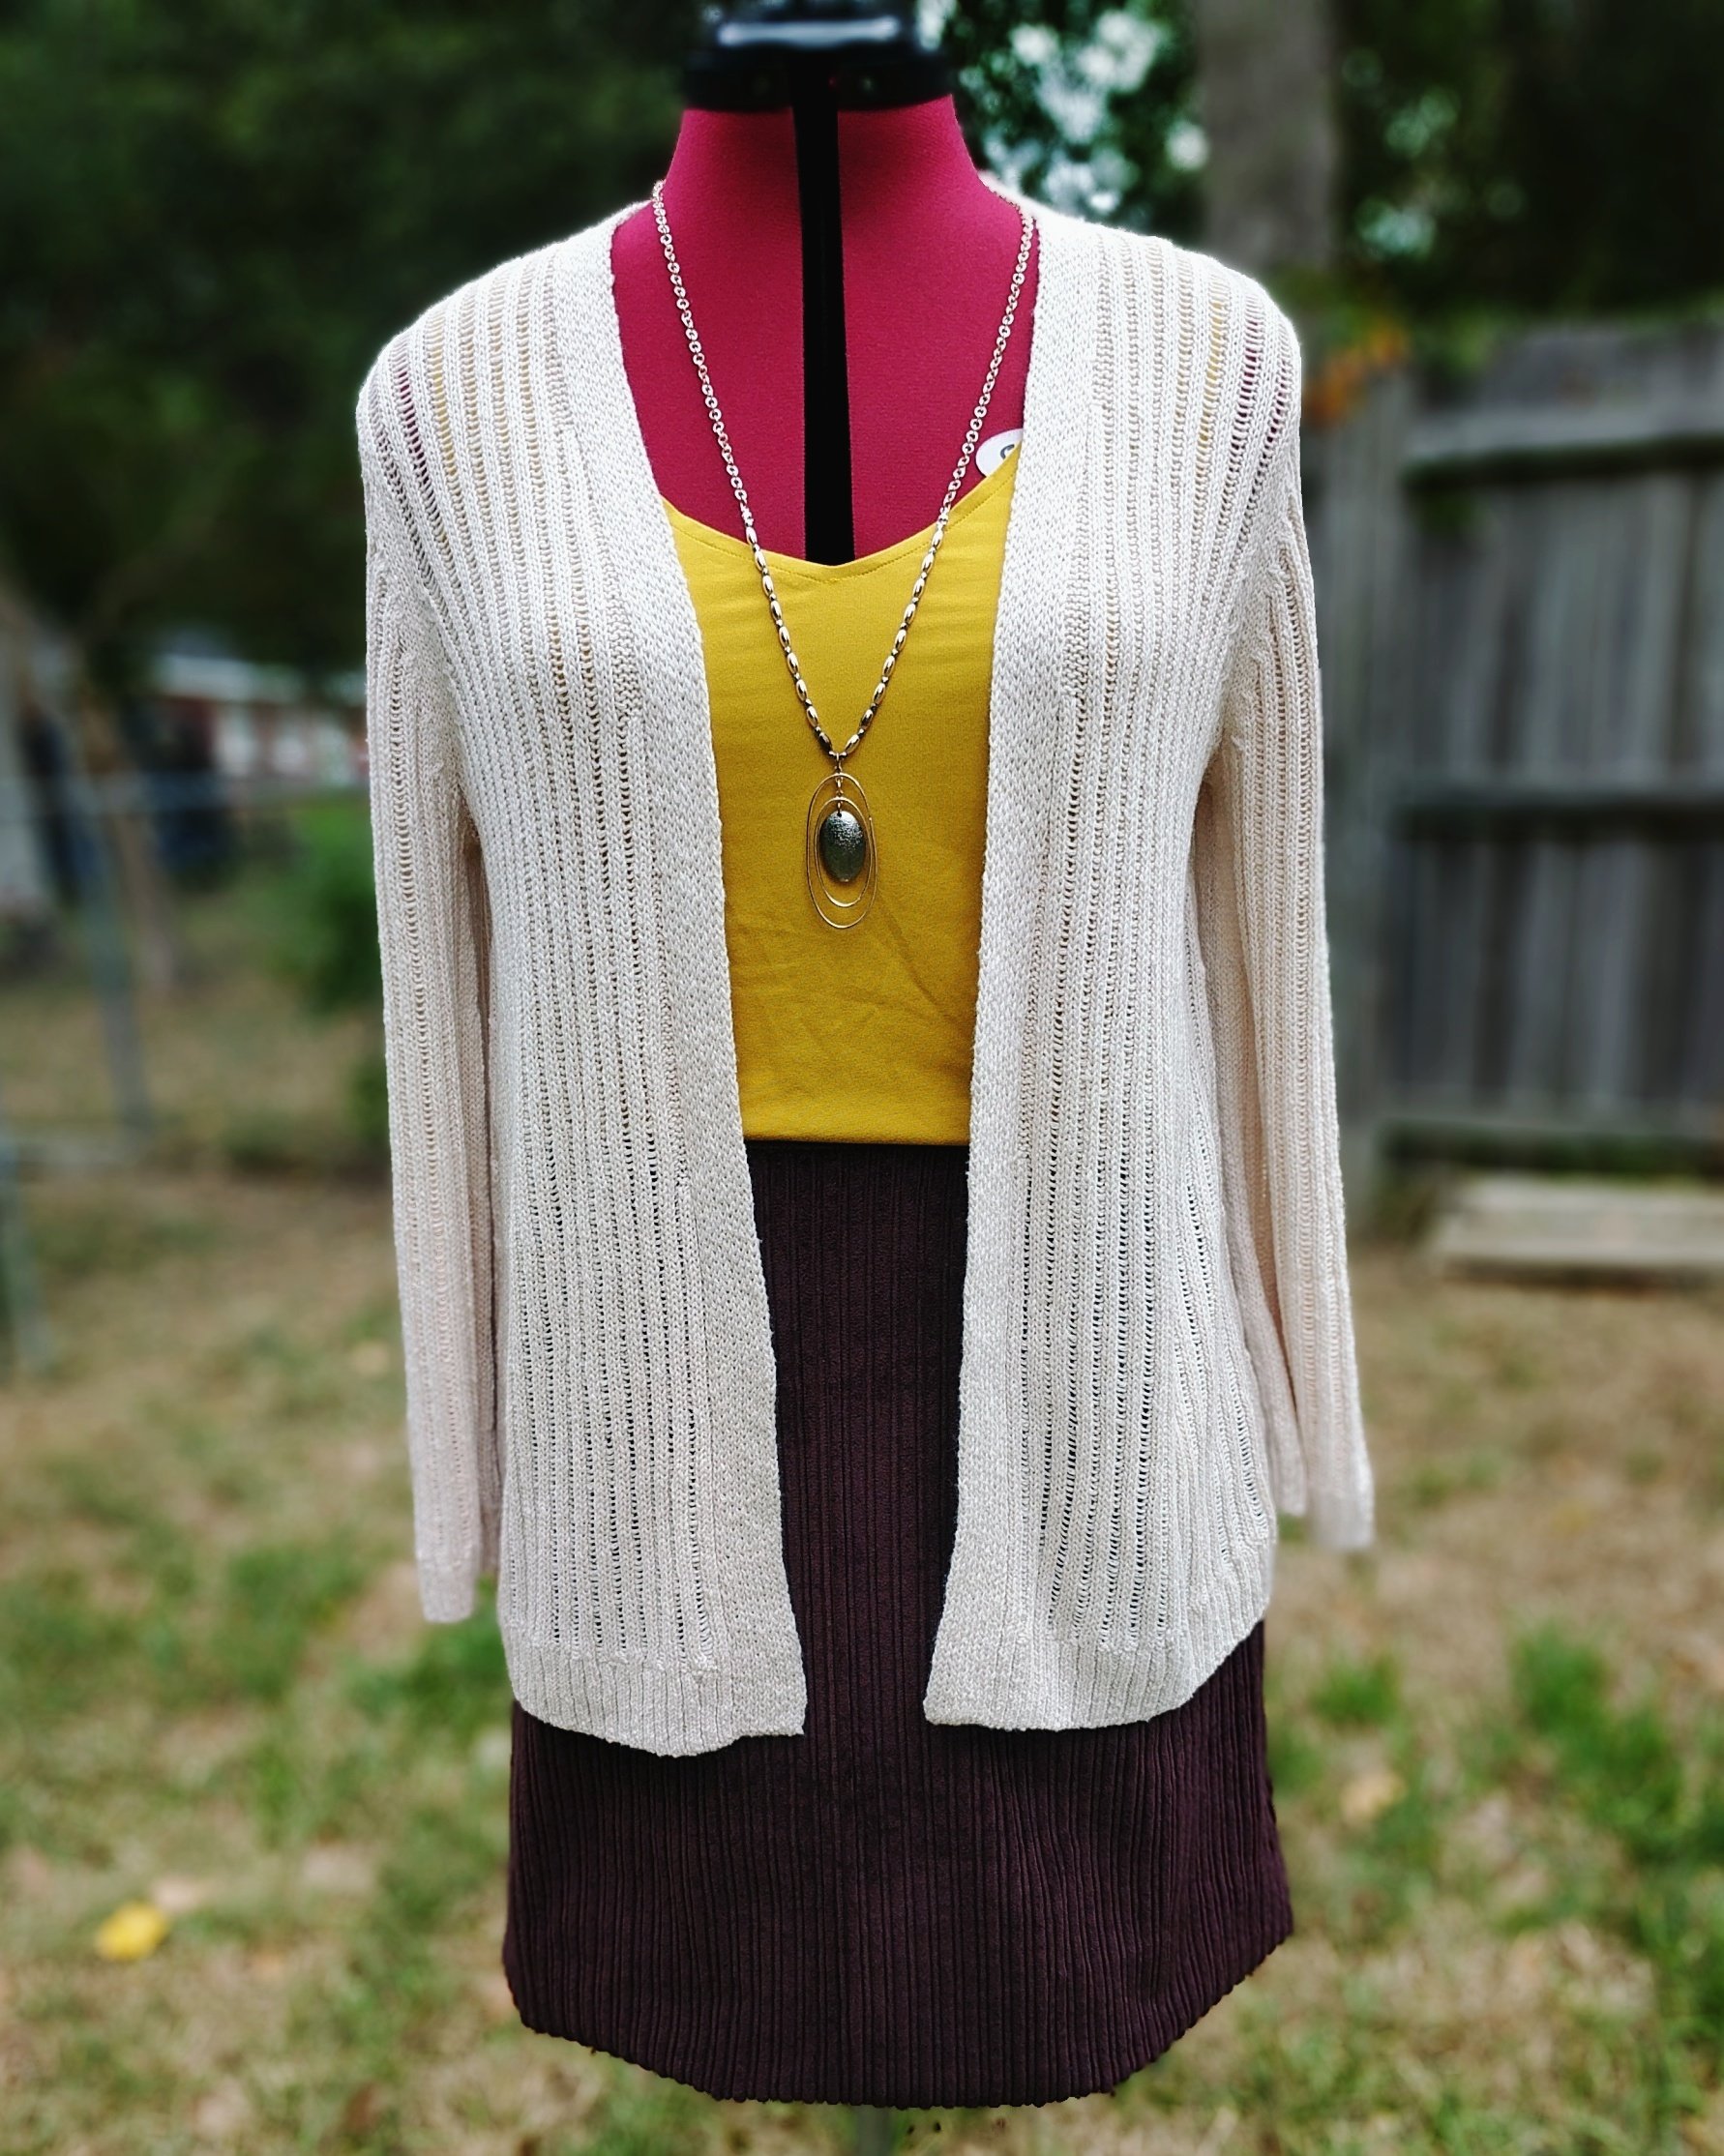 Style Arc Diana Top with sweater